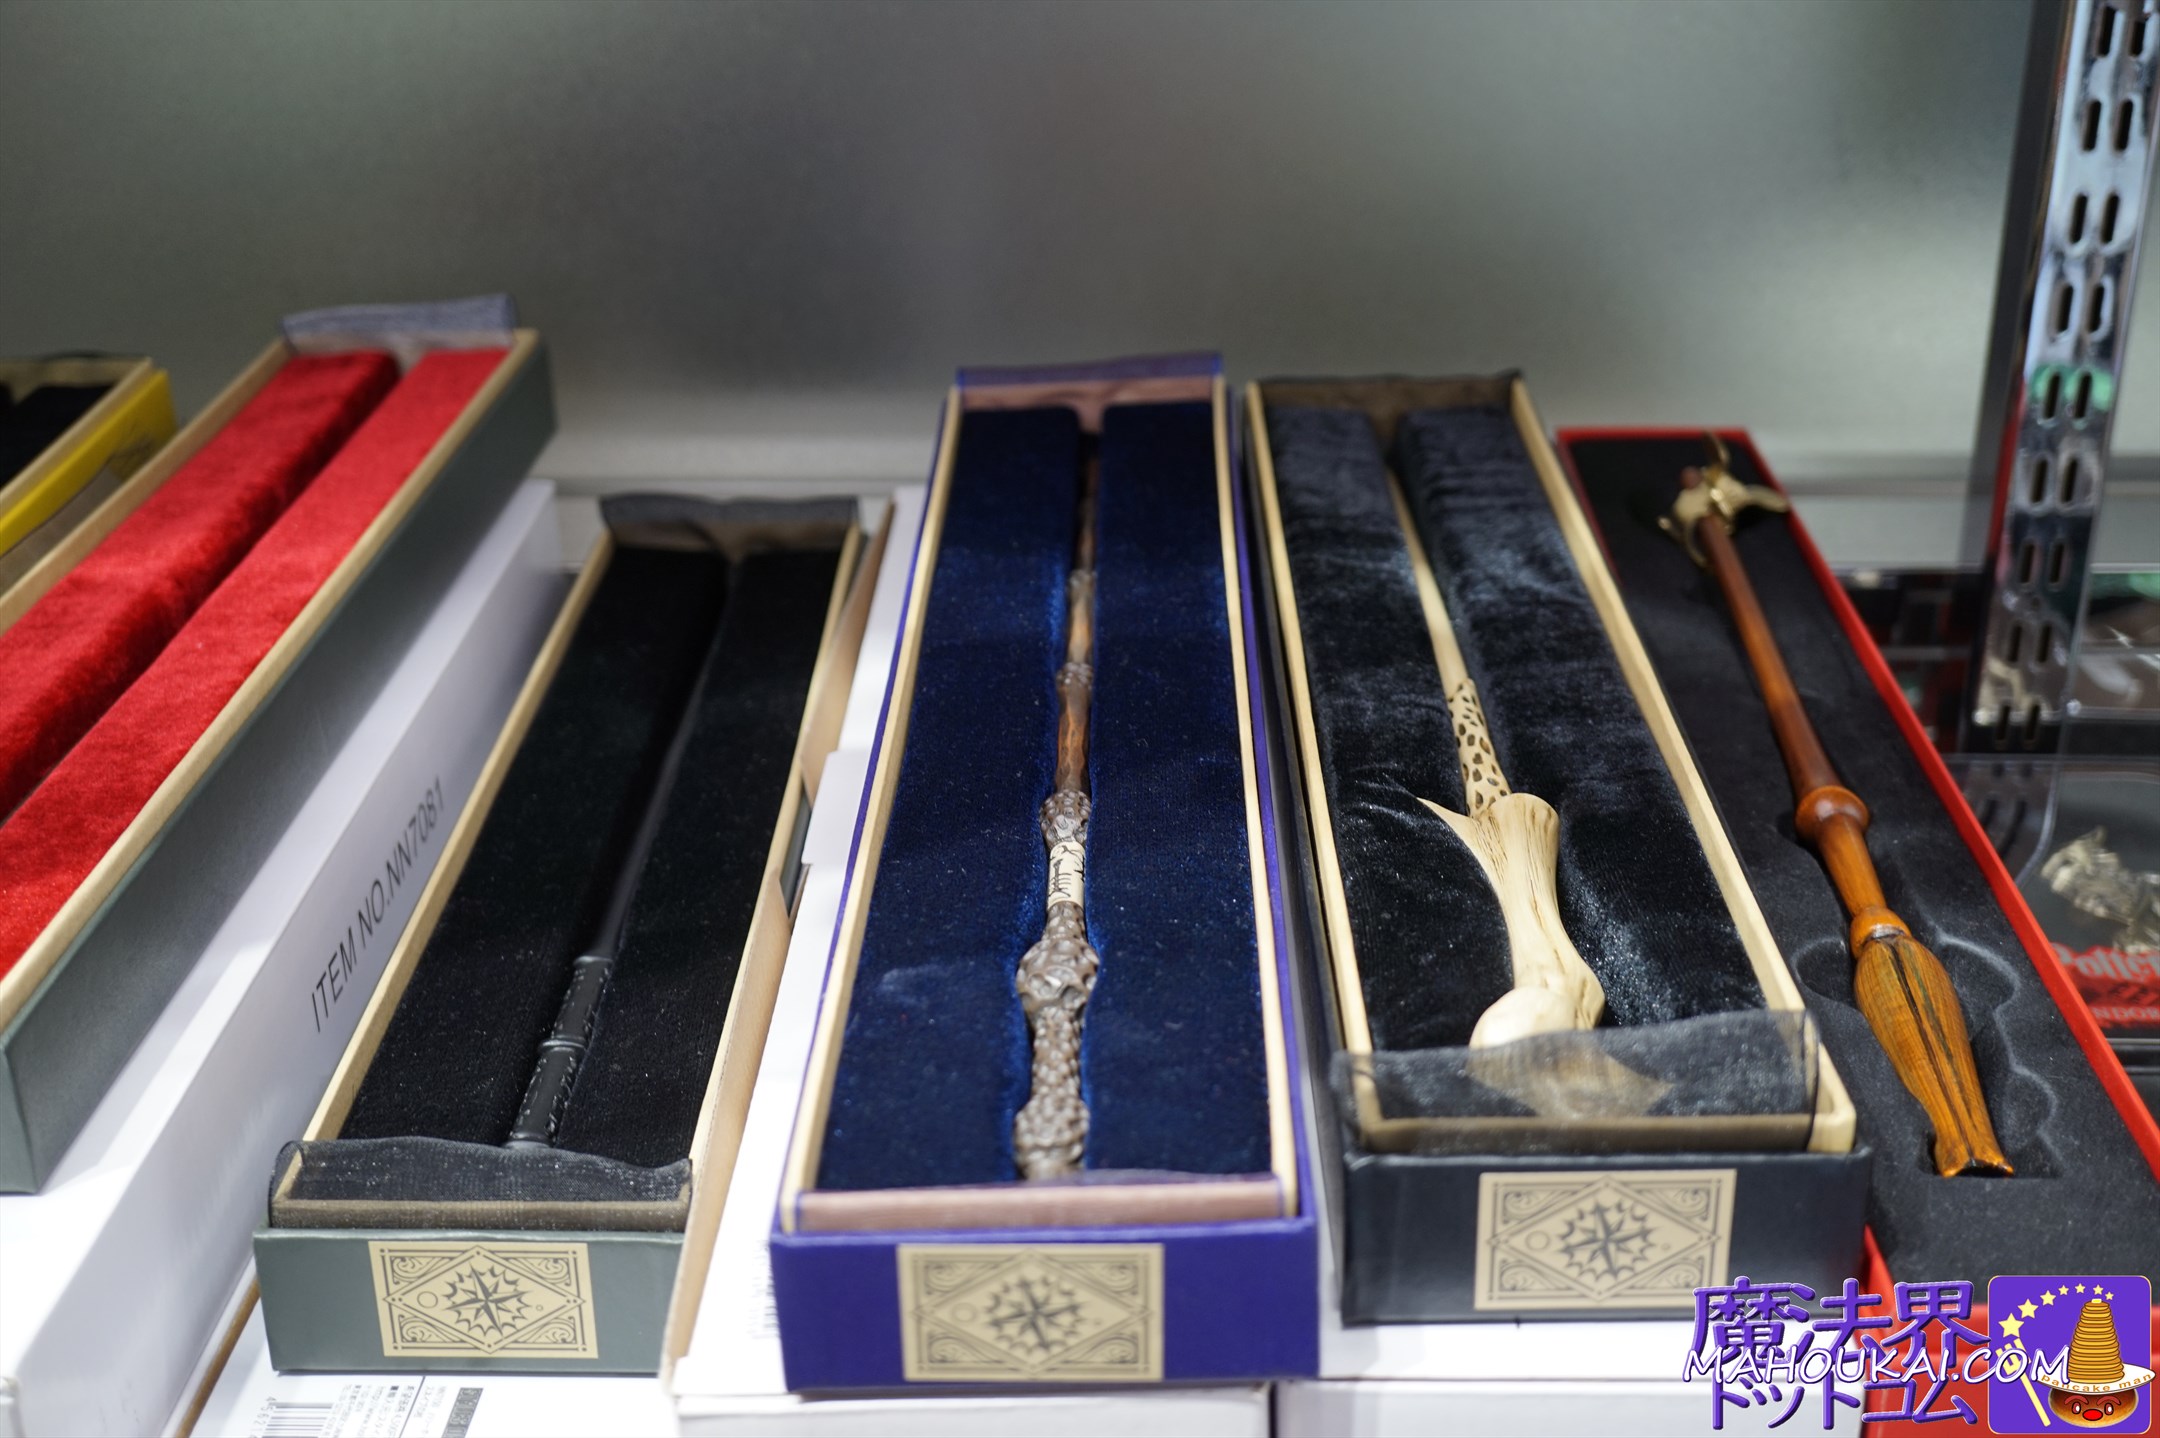 Wands from the Noble Collection Wizarding World Best Goods Collection (Wizacolle), Daimaru Umeda